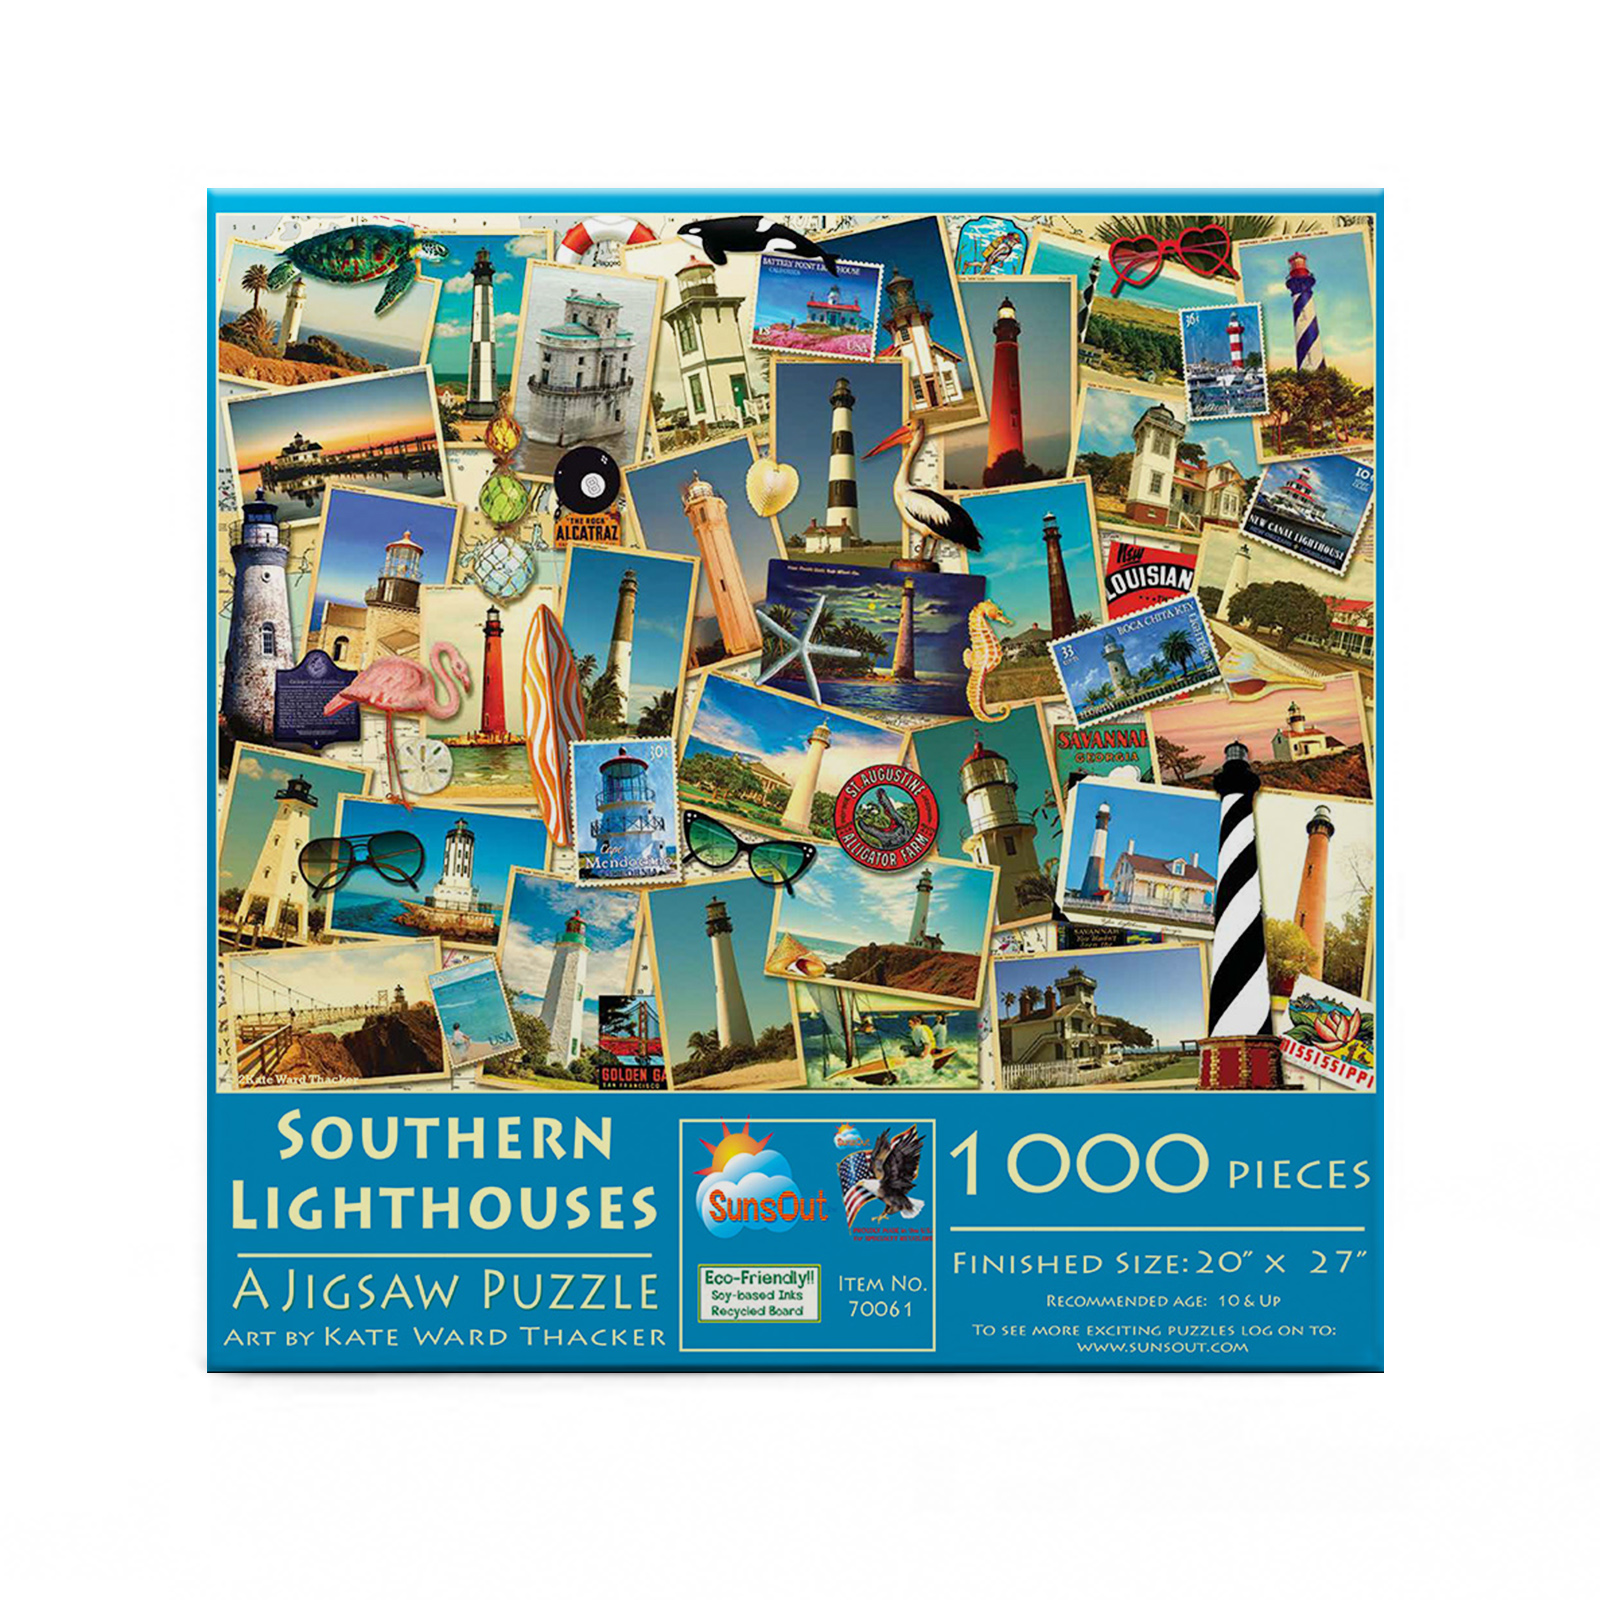 Southern Lighthouses